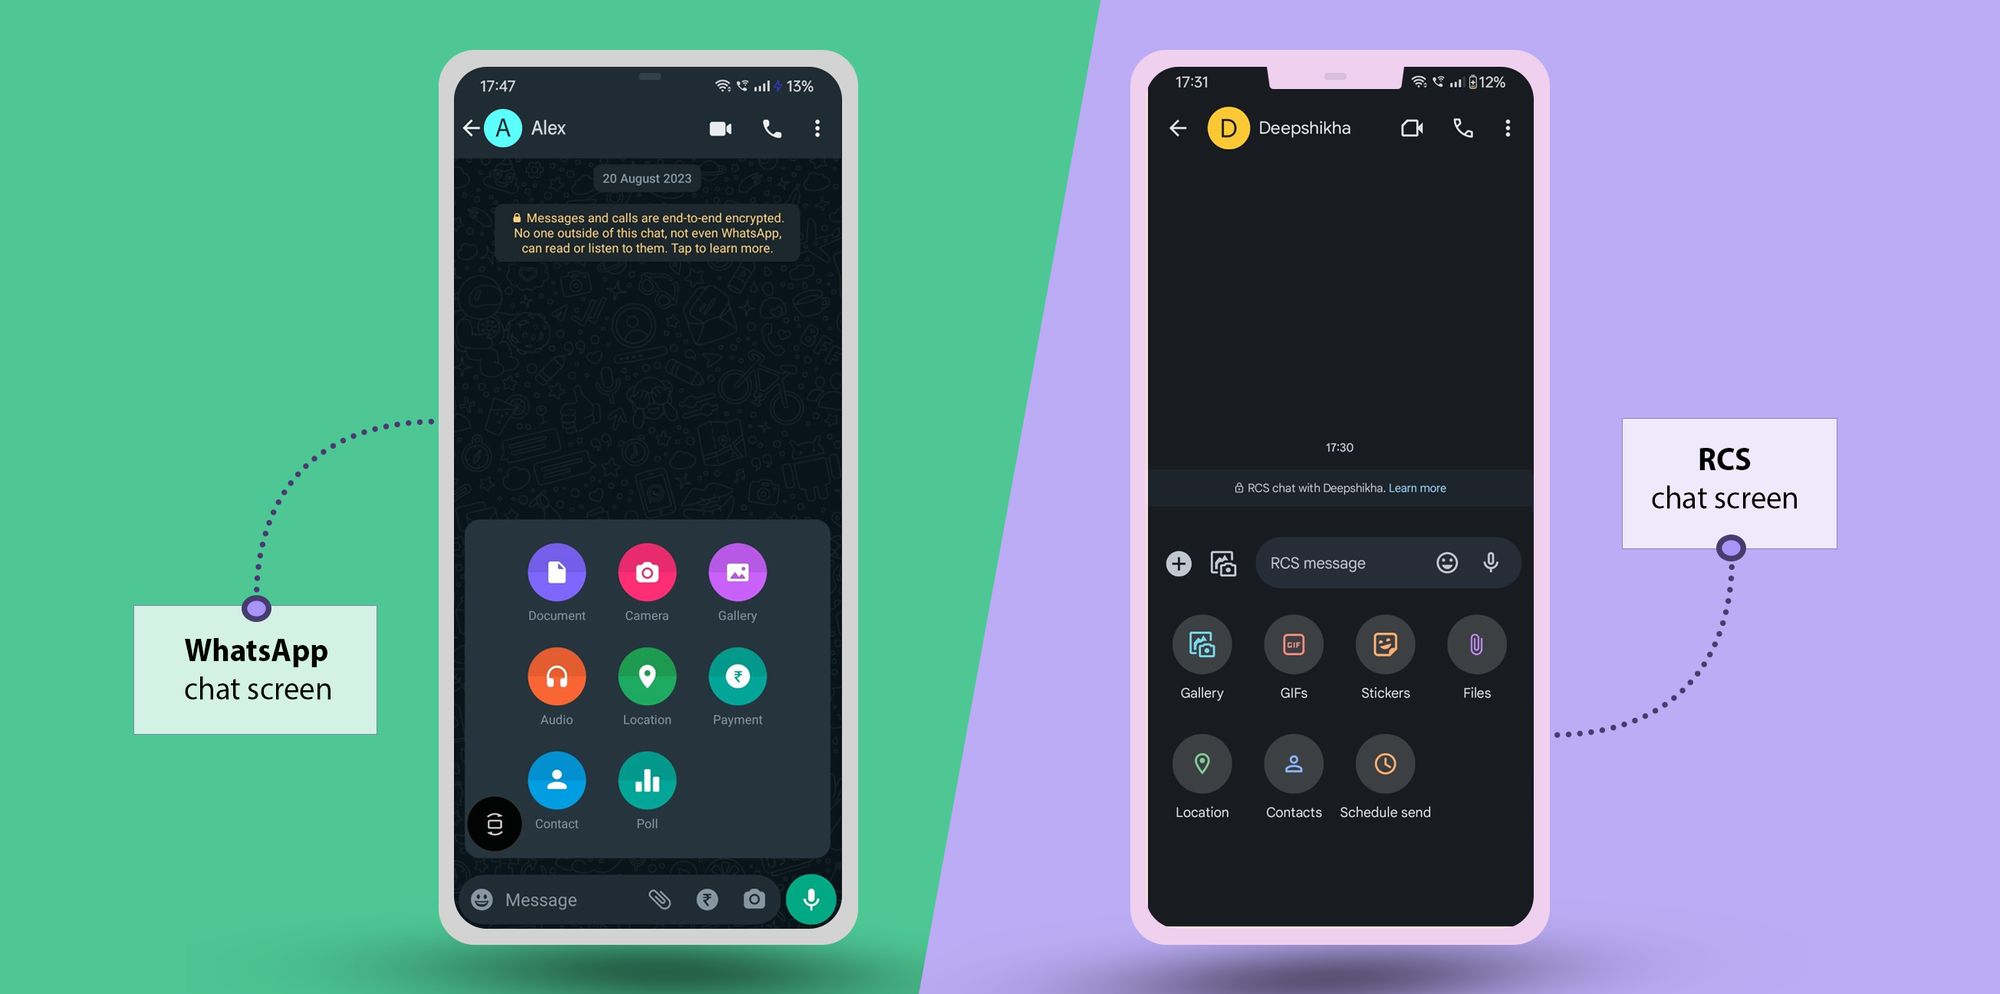 A comparison of WhatsApp and RCS chat screens